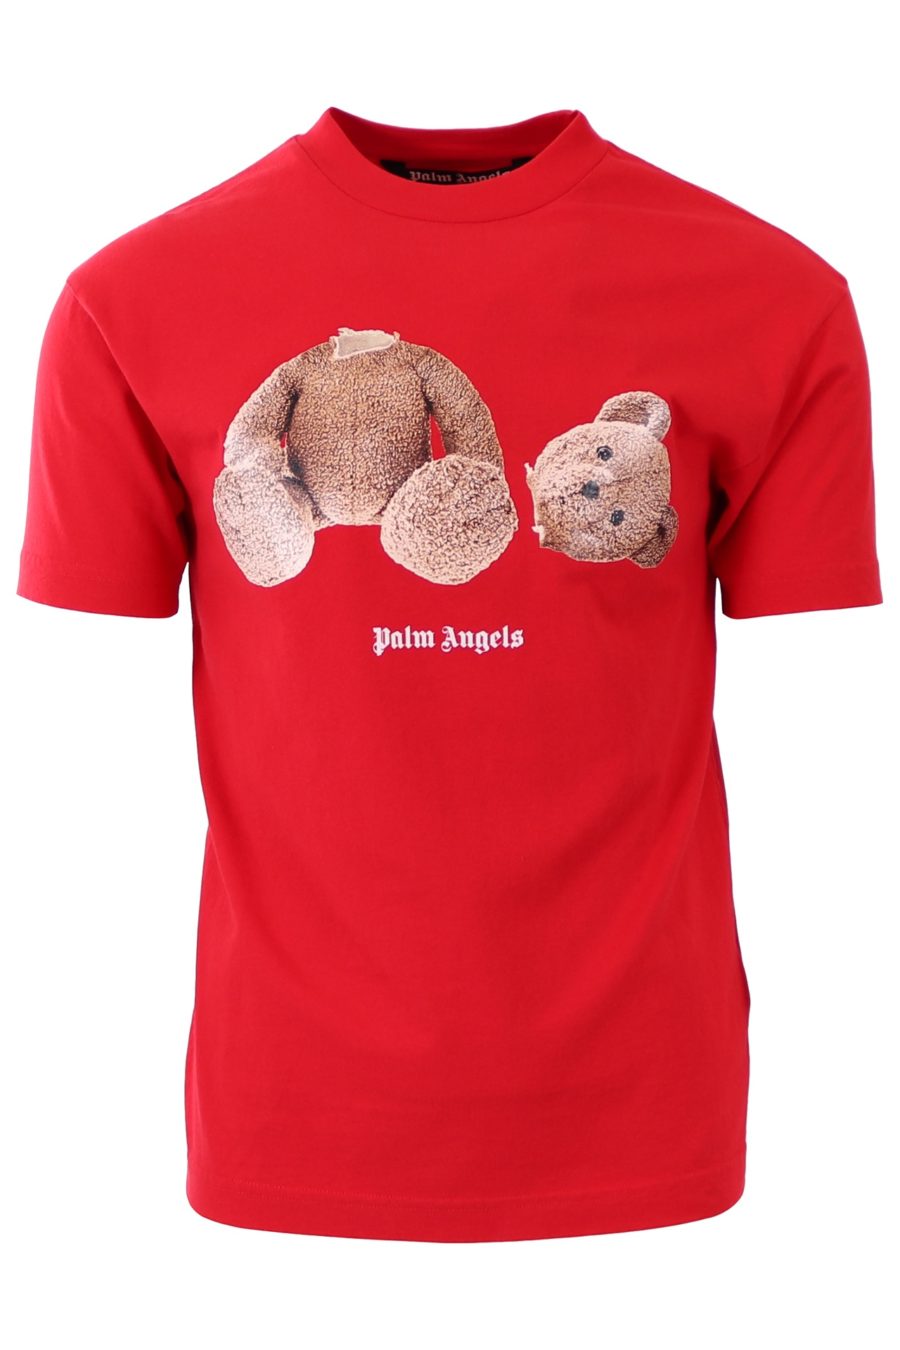 T-shirt Palm Angels red with bear - 4516453a8b99acee0b870798849aa7ecbbd20f1f